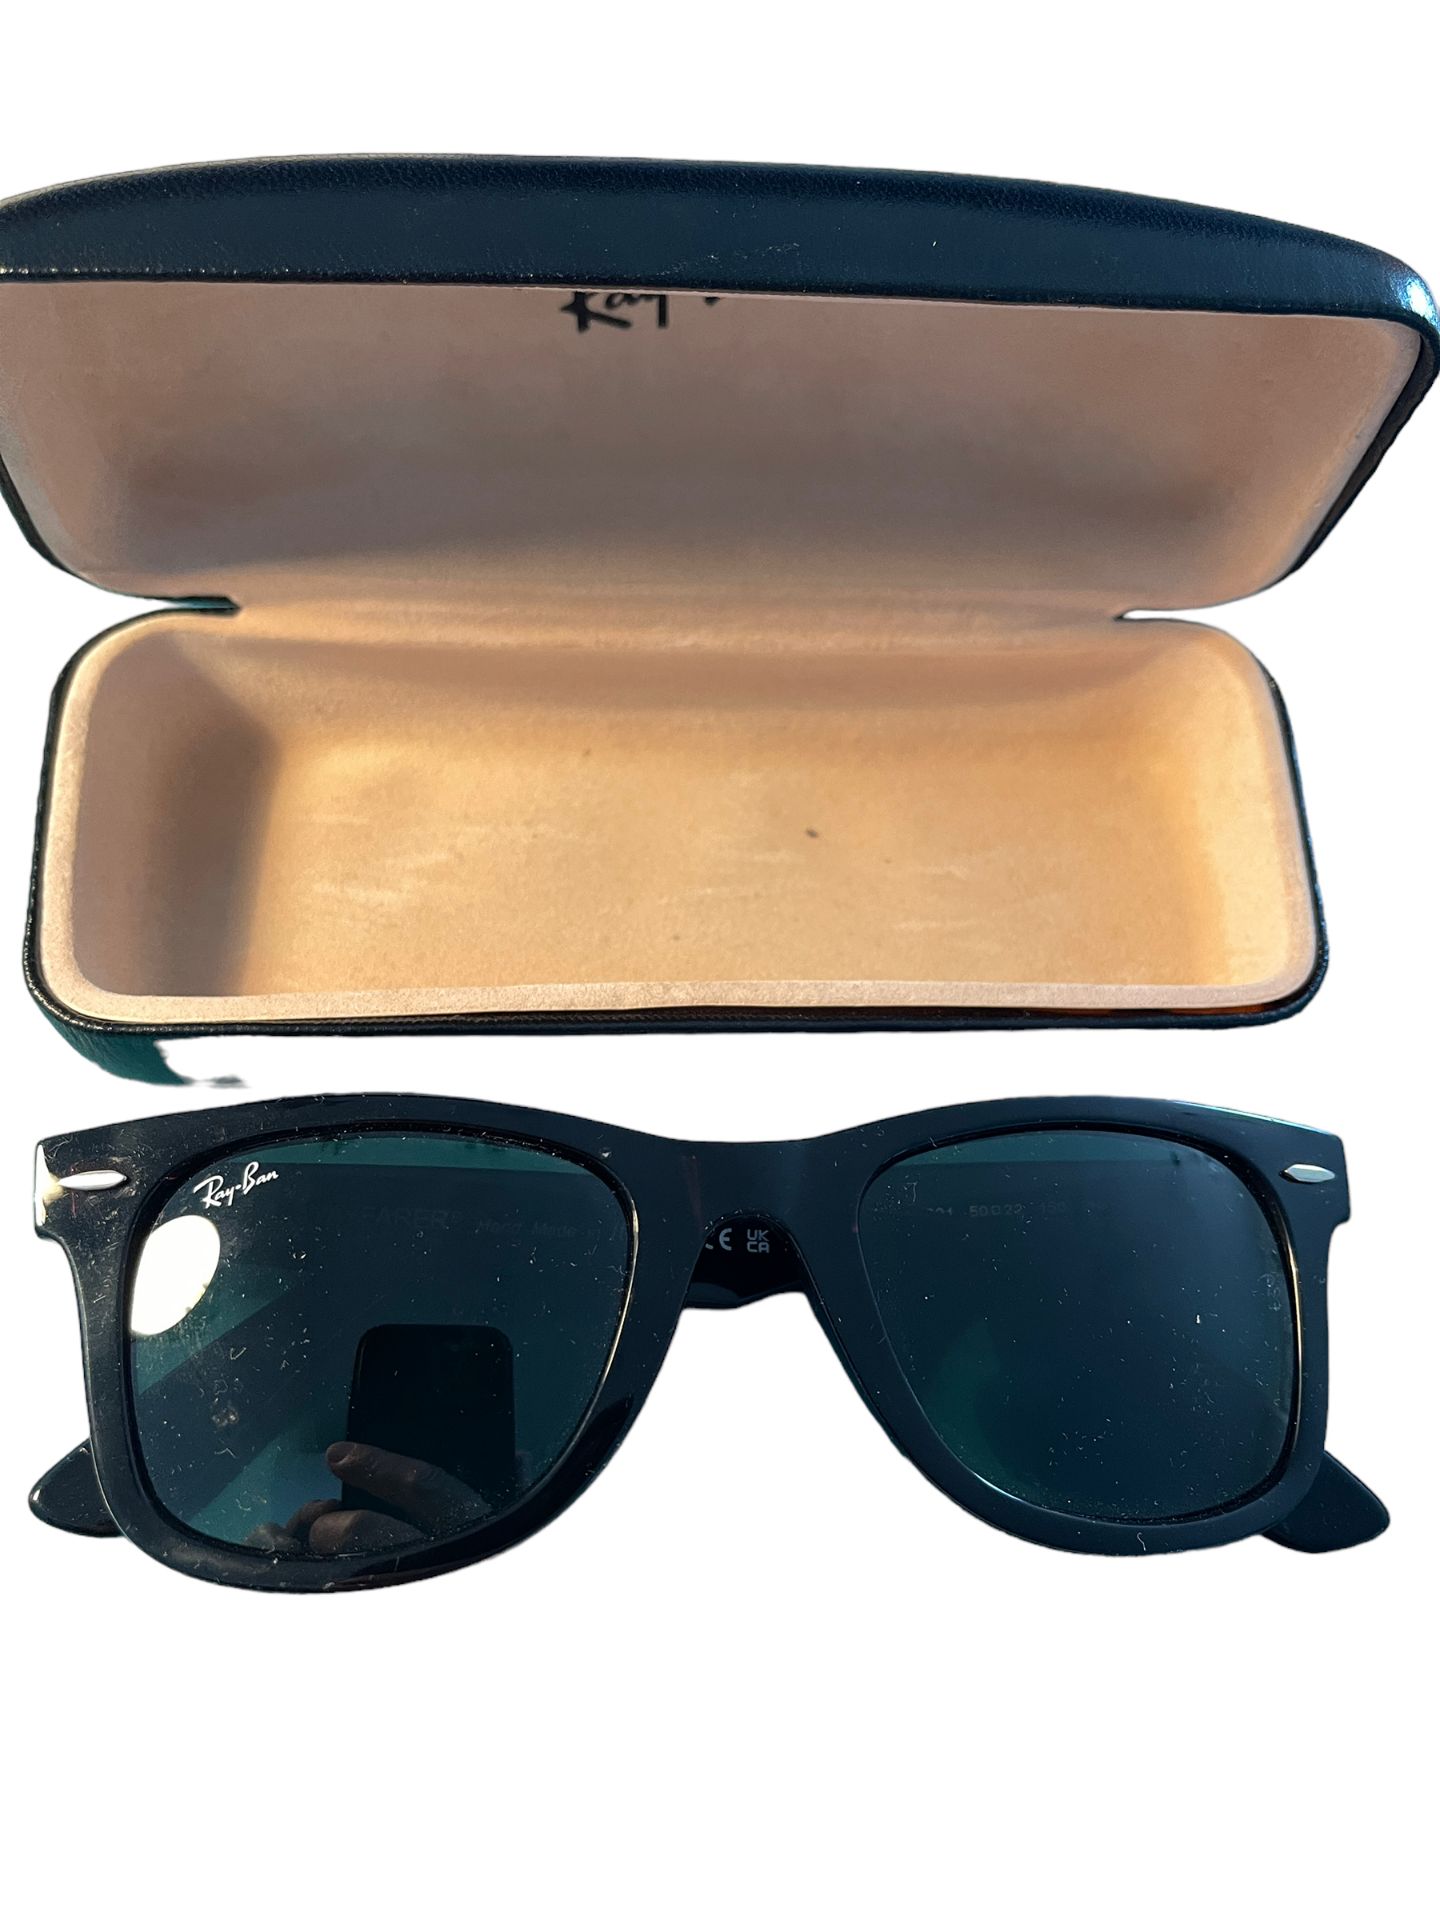 Aftershaves mystery box containing watches sunglasses ect worth - Image 18 of 31